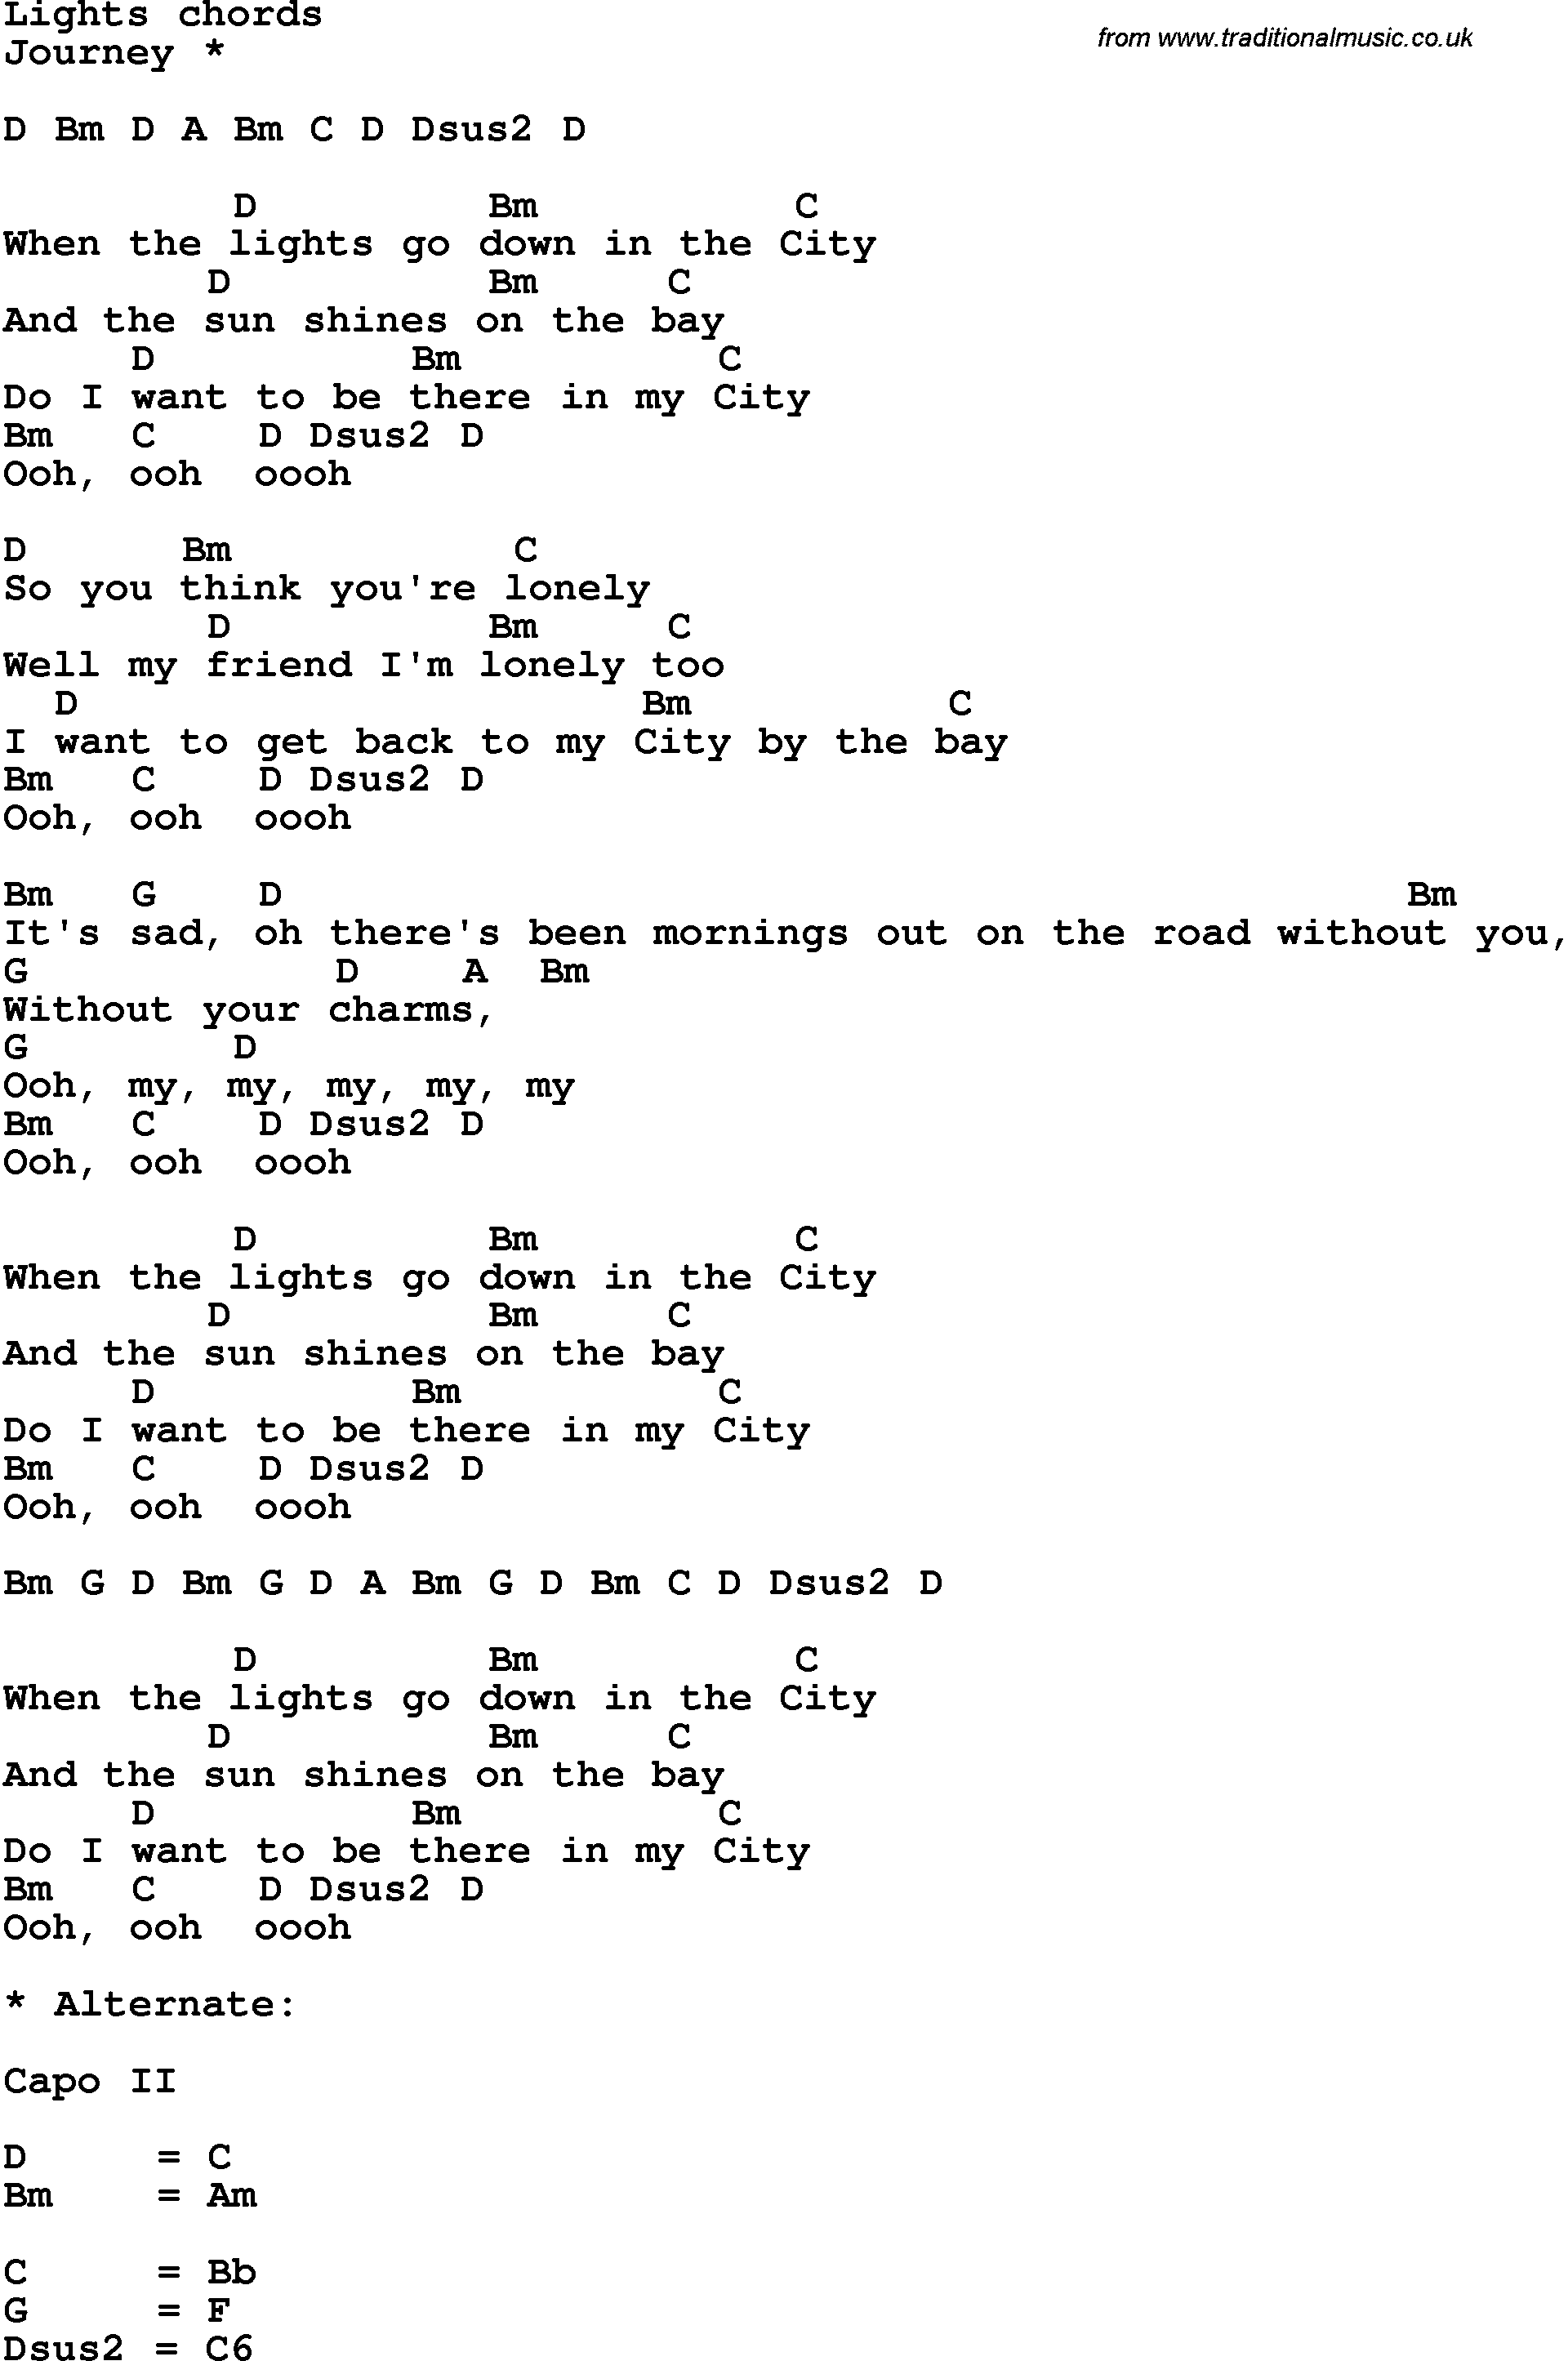 Song Lyrics with guitar chords for Lights